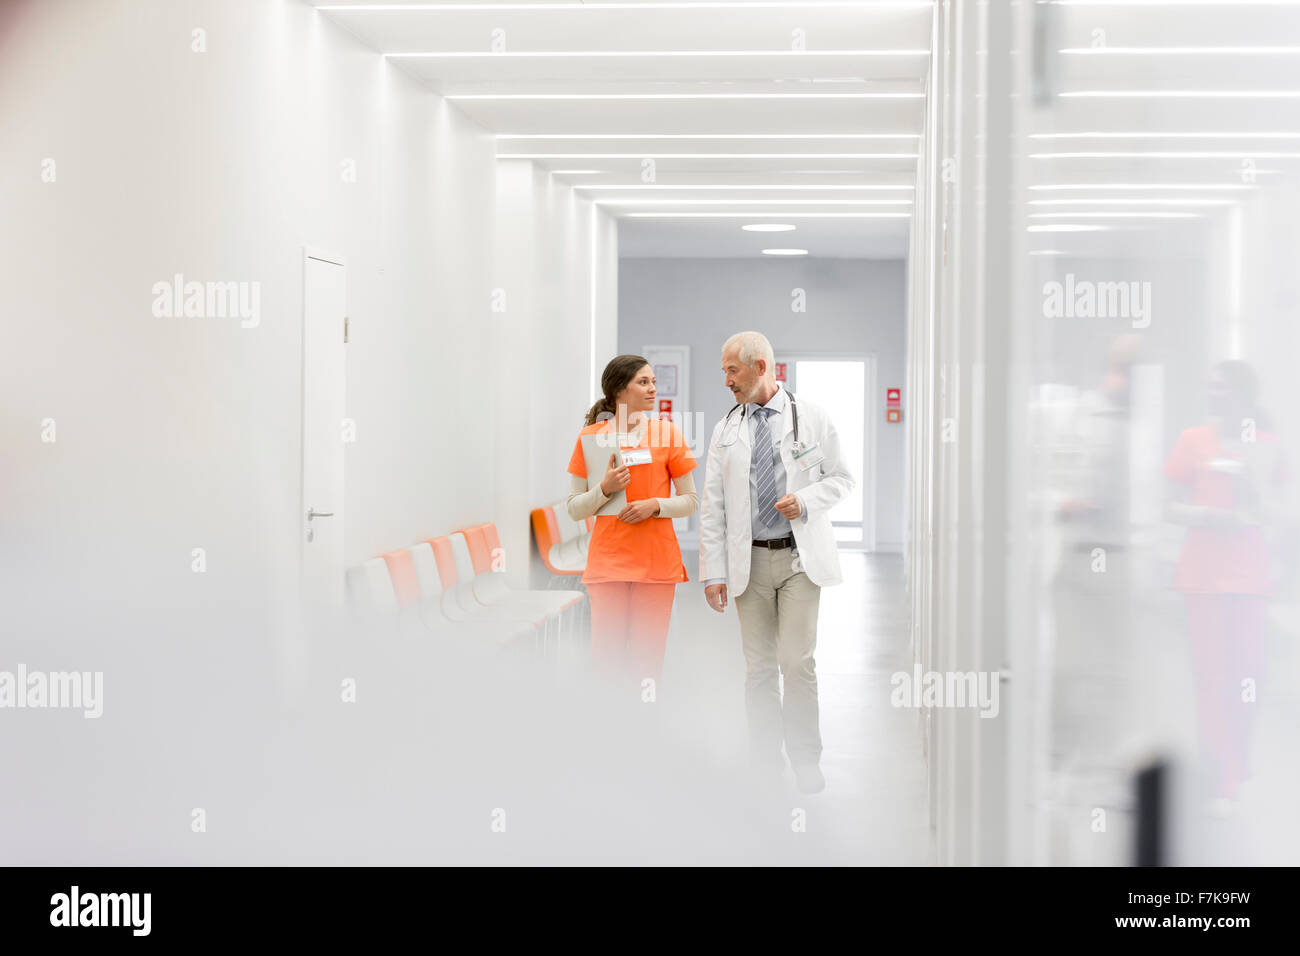 Doctor and nurse making rounds in hospital corridor Stock Photo